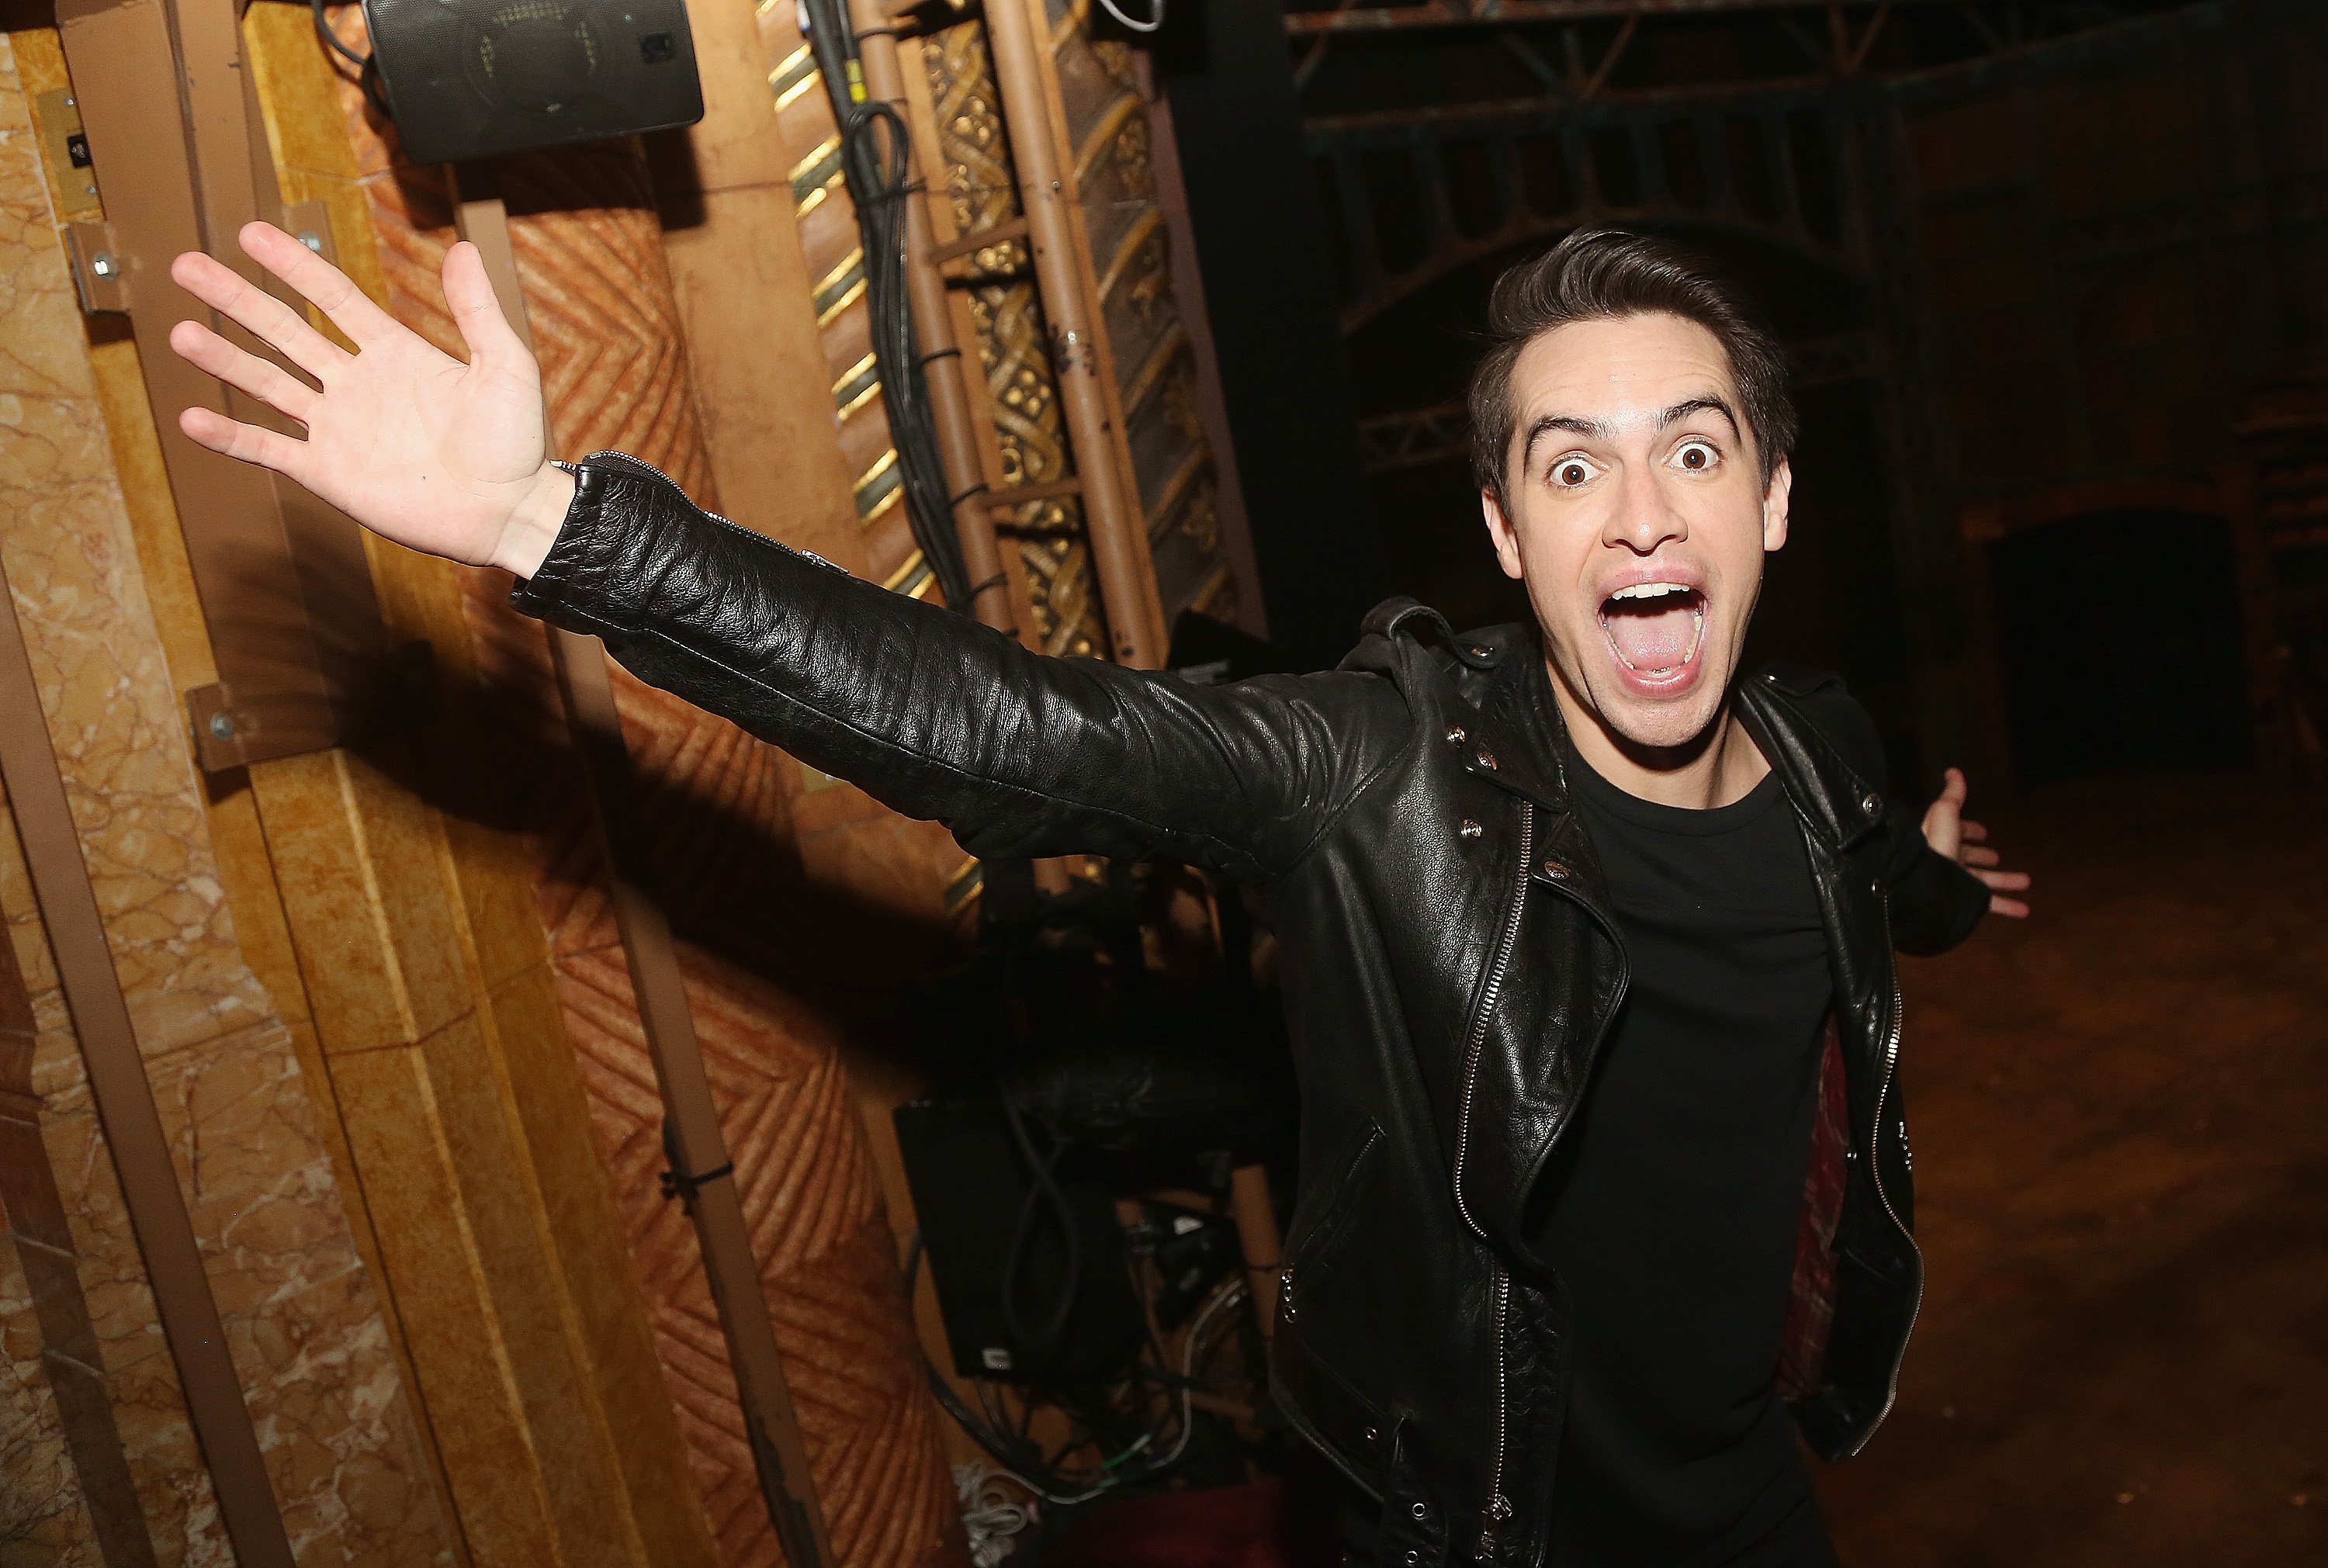 Brendon Urie of Panic! at the Disco raising his arm